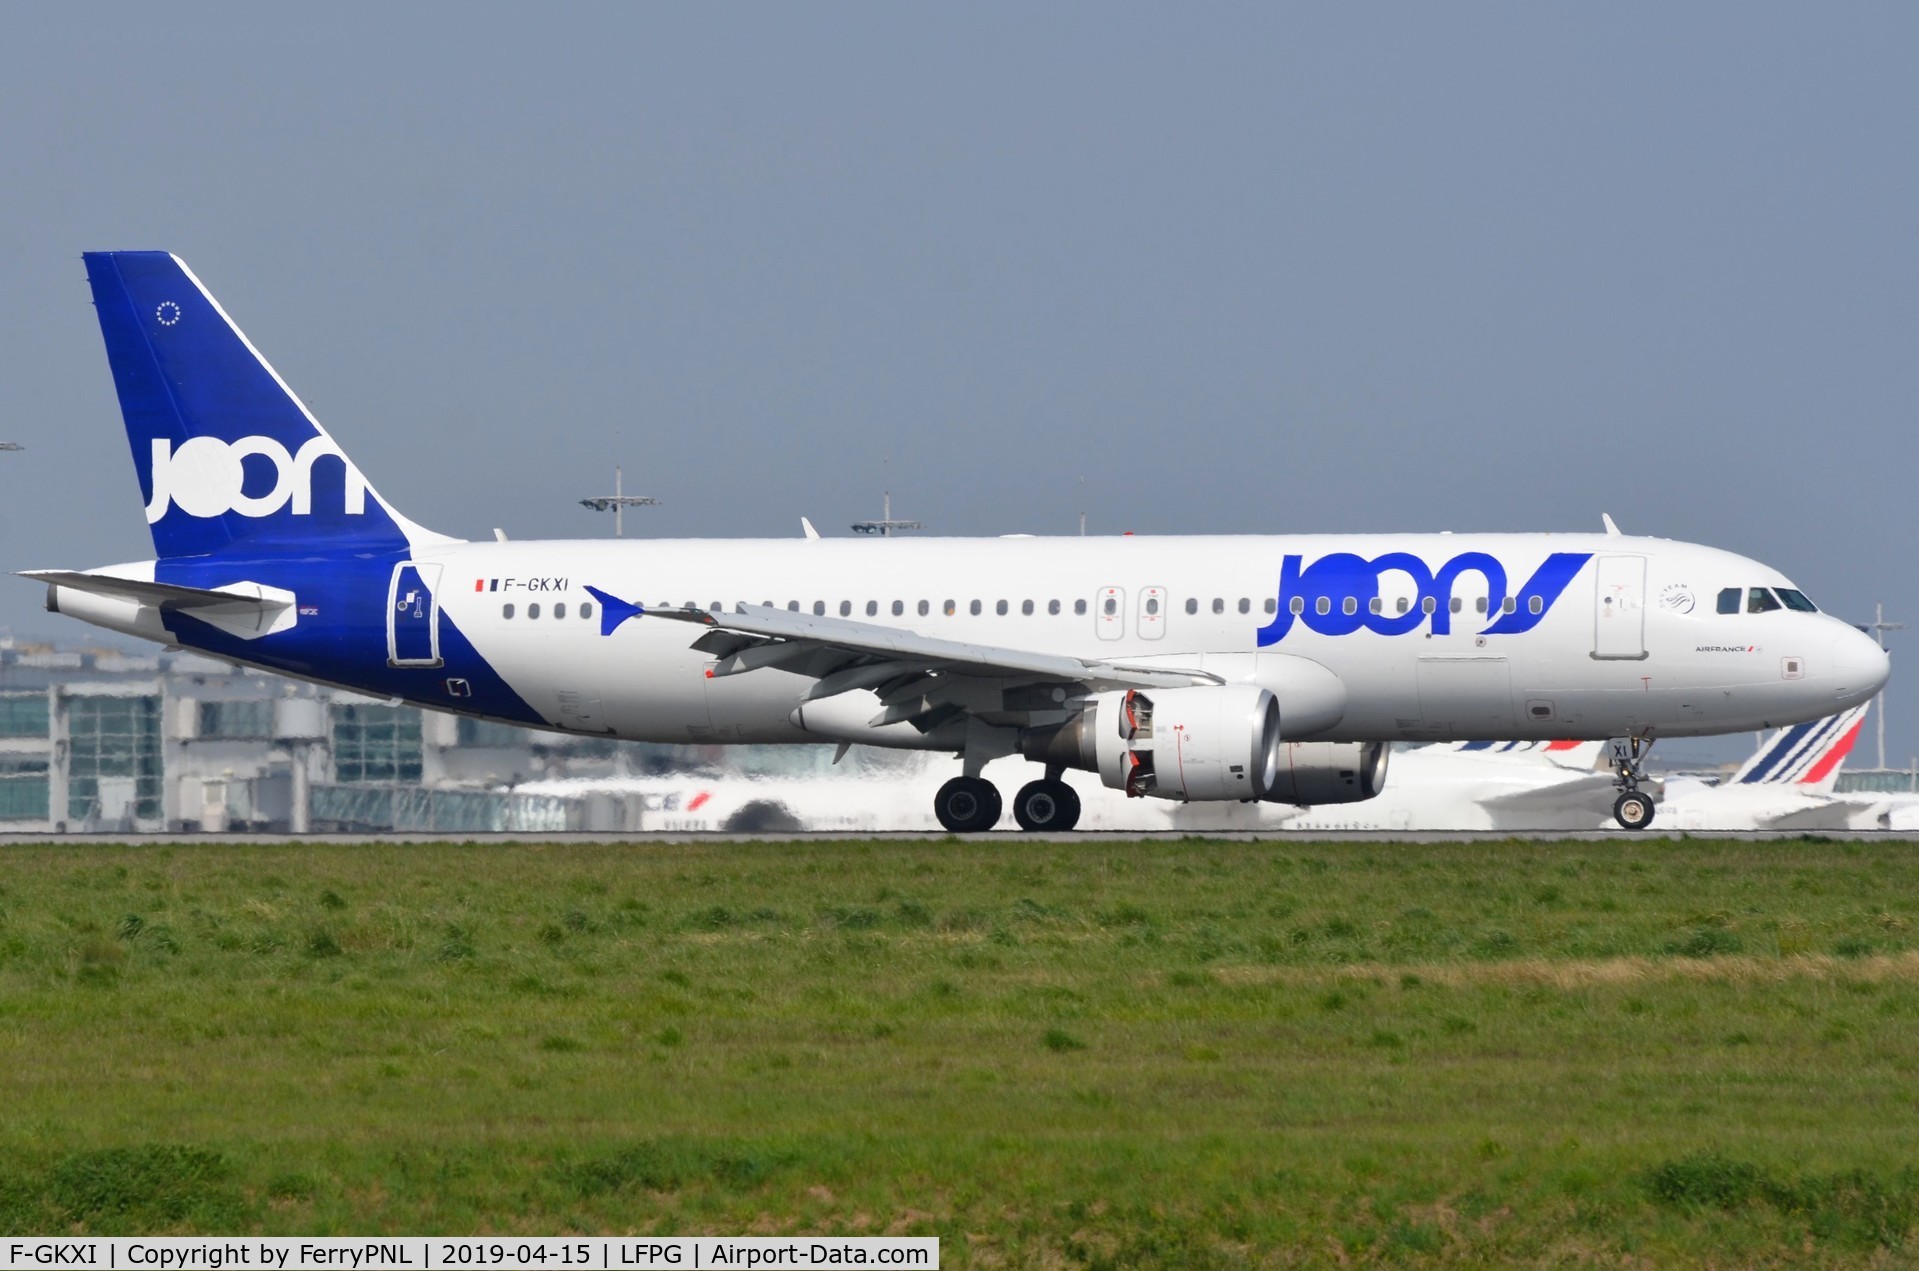 F-GKXI, 2003 Airbus A320-214 C/N 1949, Arrival of Joon A320